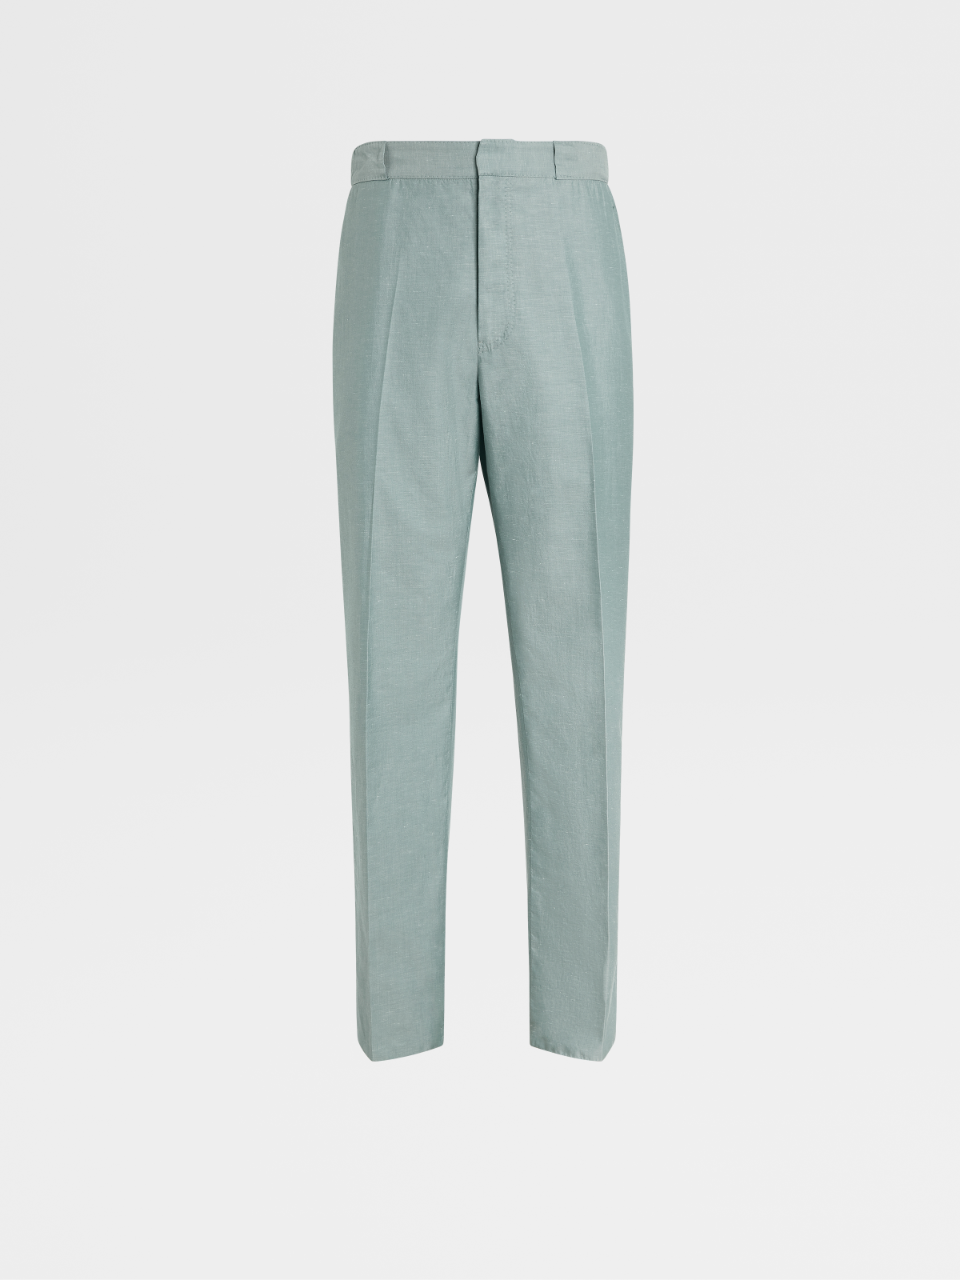 Cotton Linen and Silk Joggers